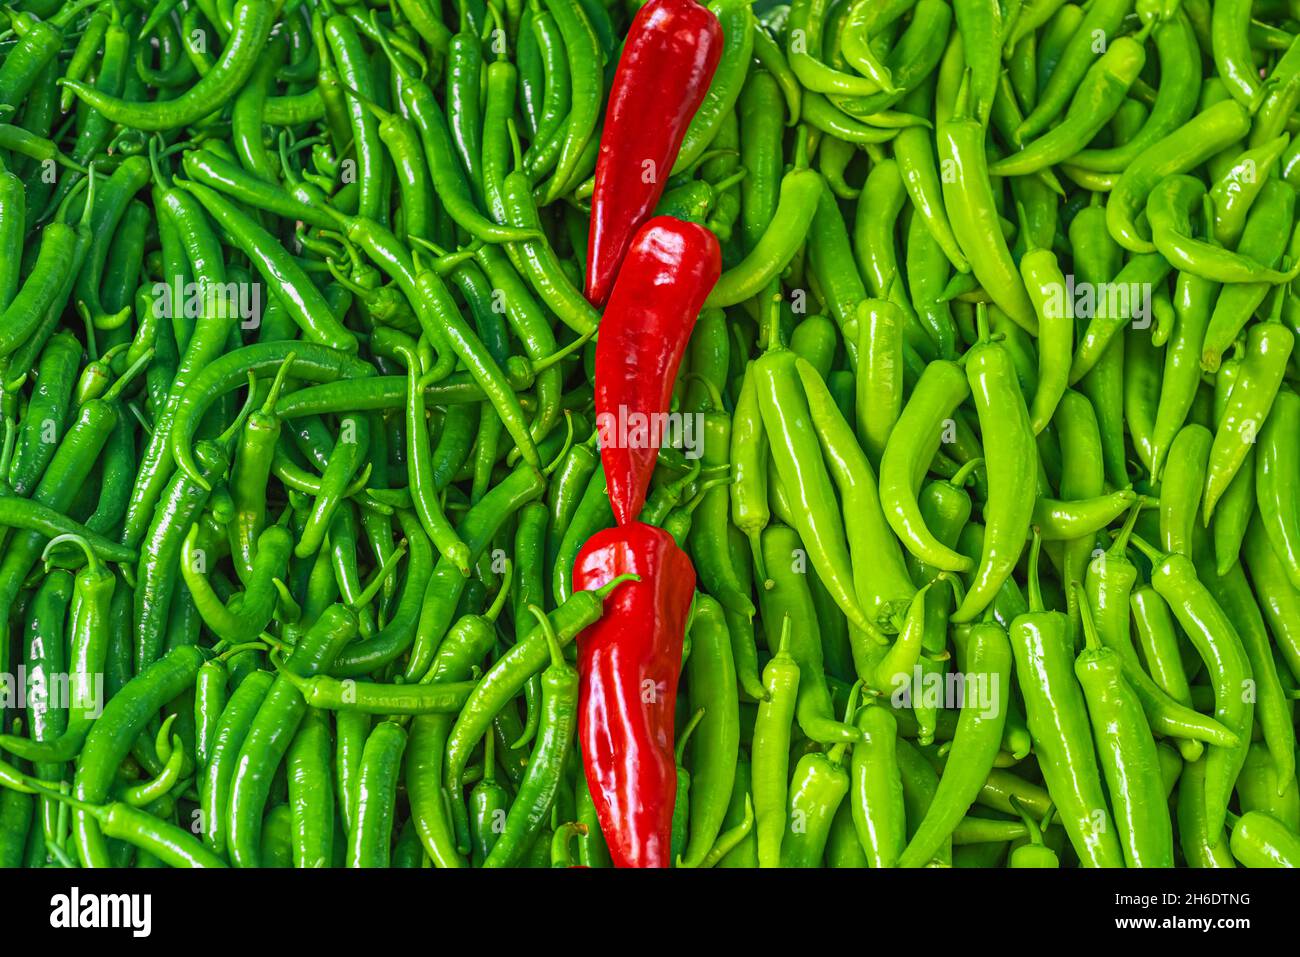 Red and green chili peppers. Fresh vegetable background. Stock Photo